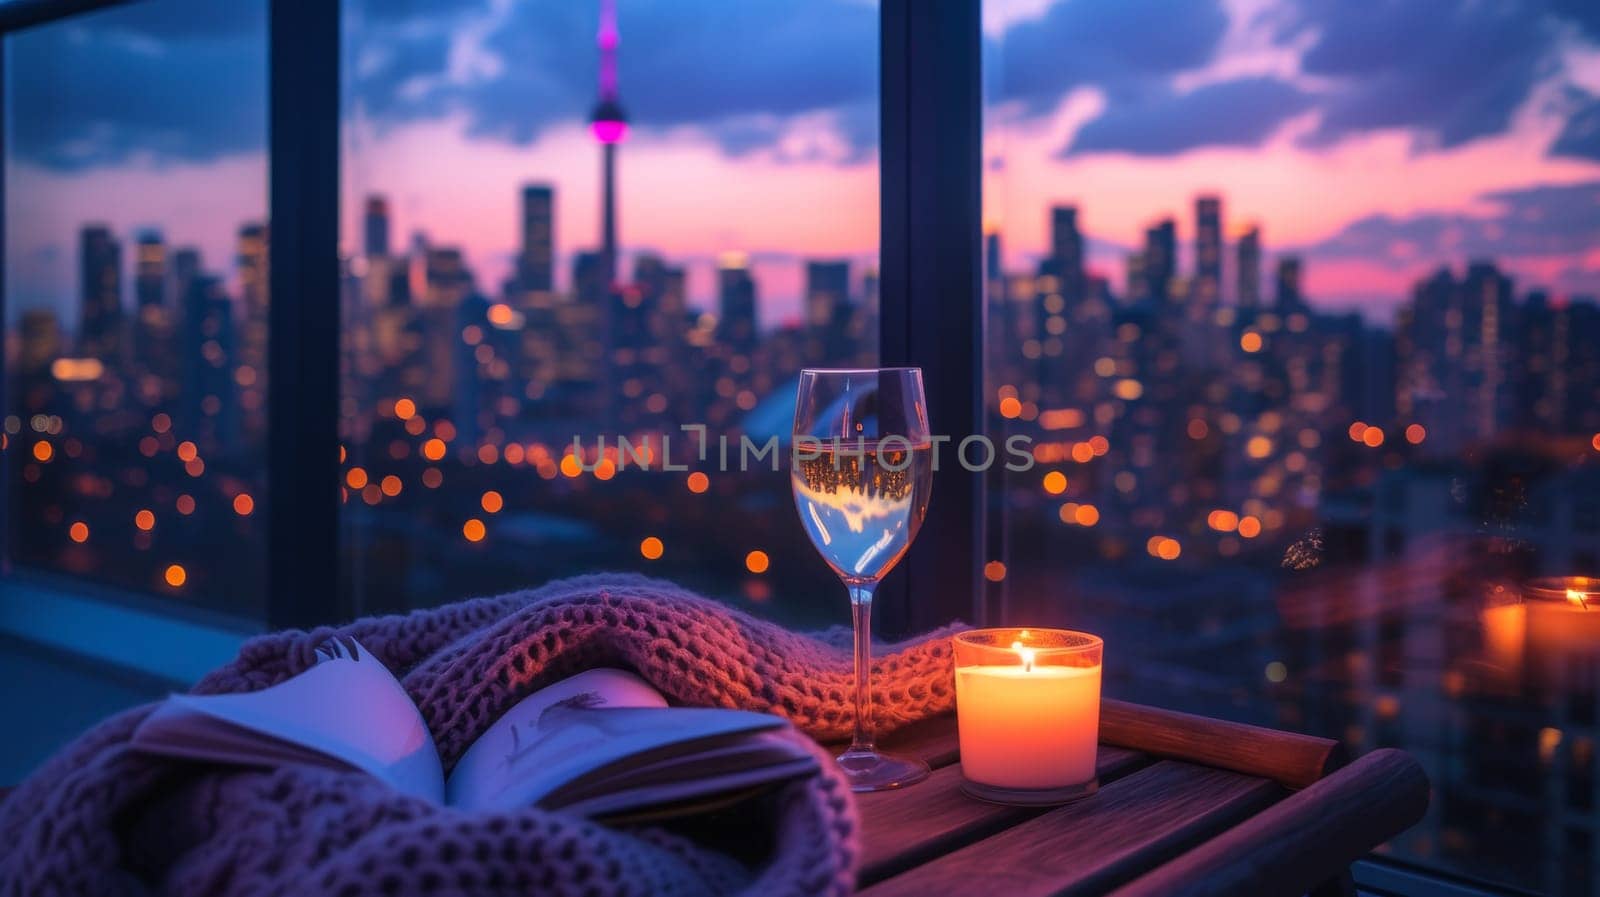 A candle, a book and wine on the table in front of city lights